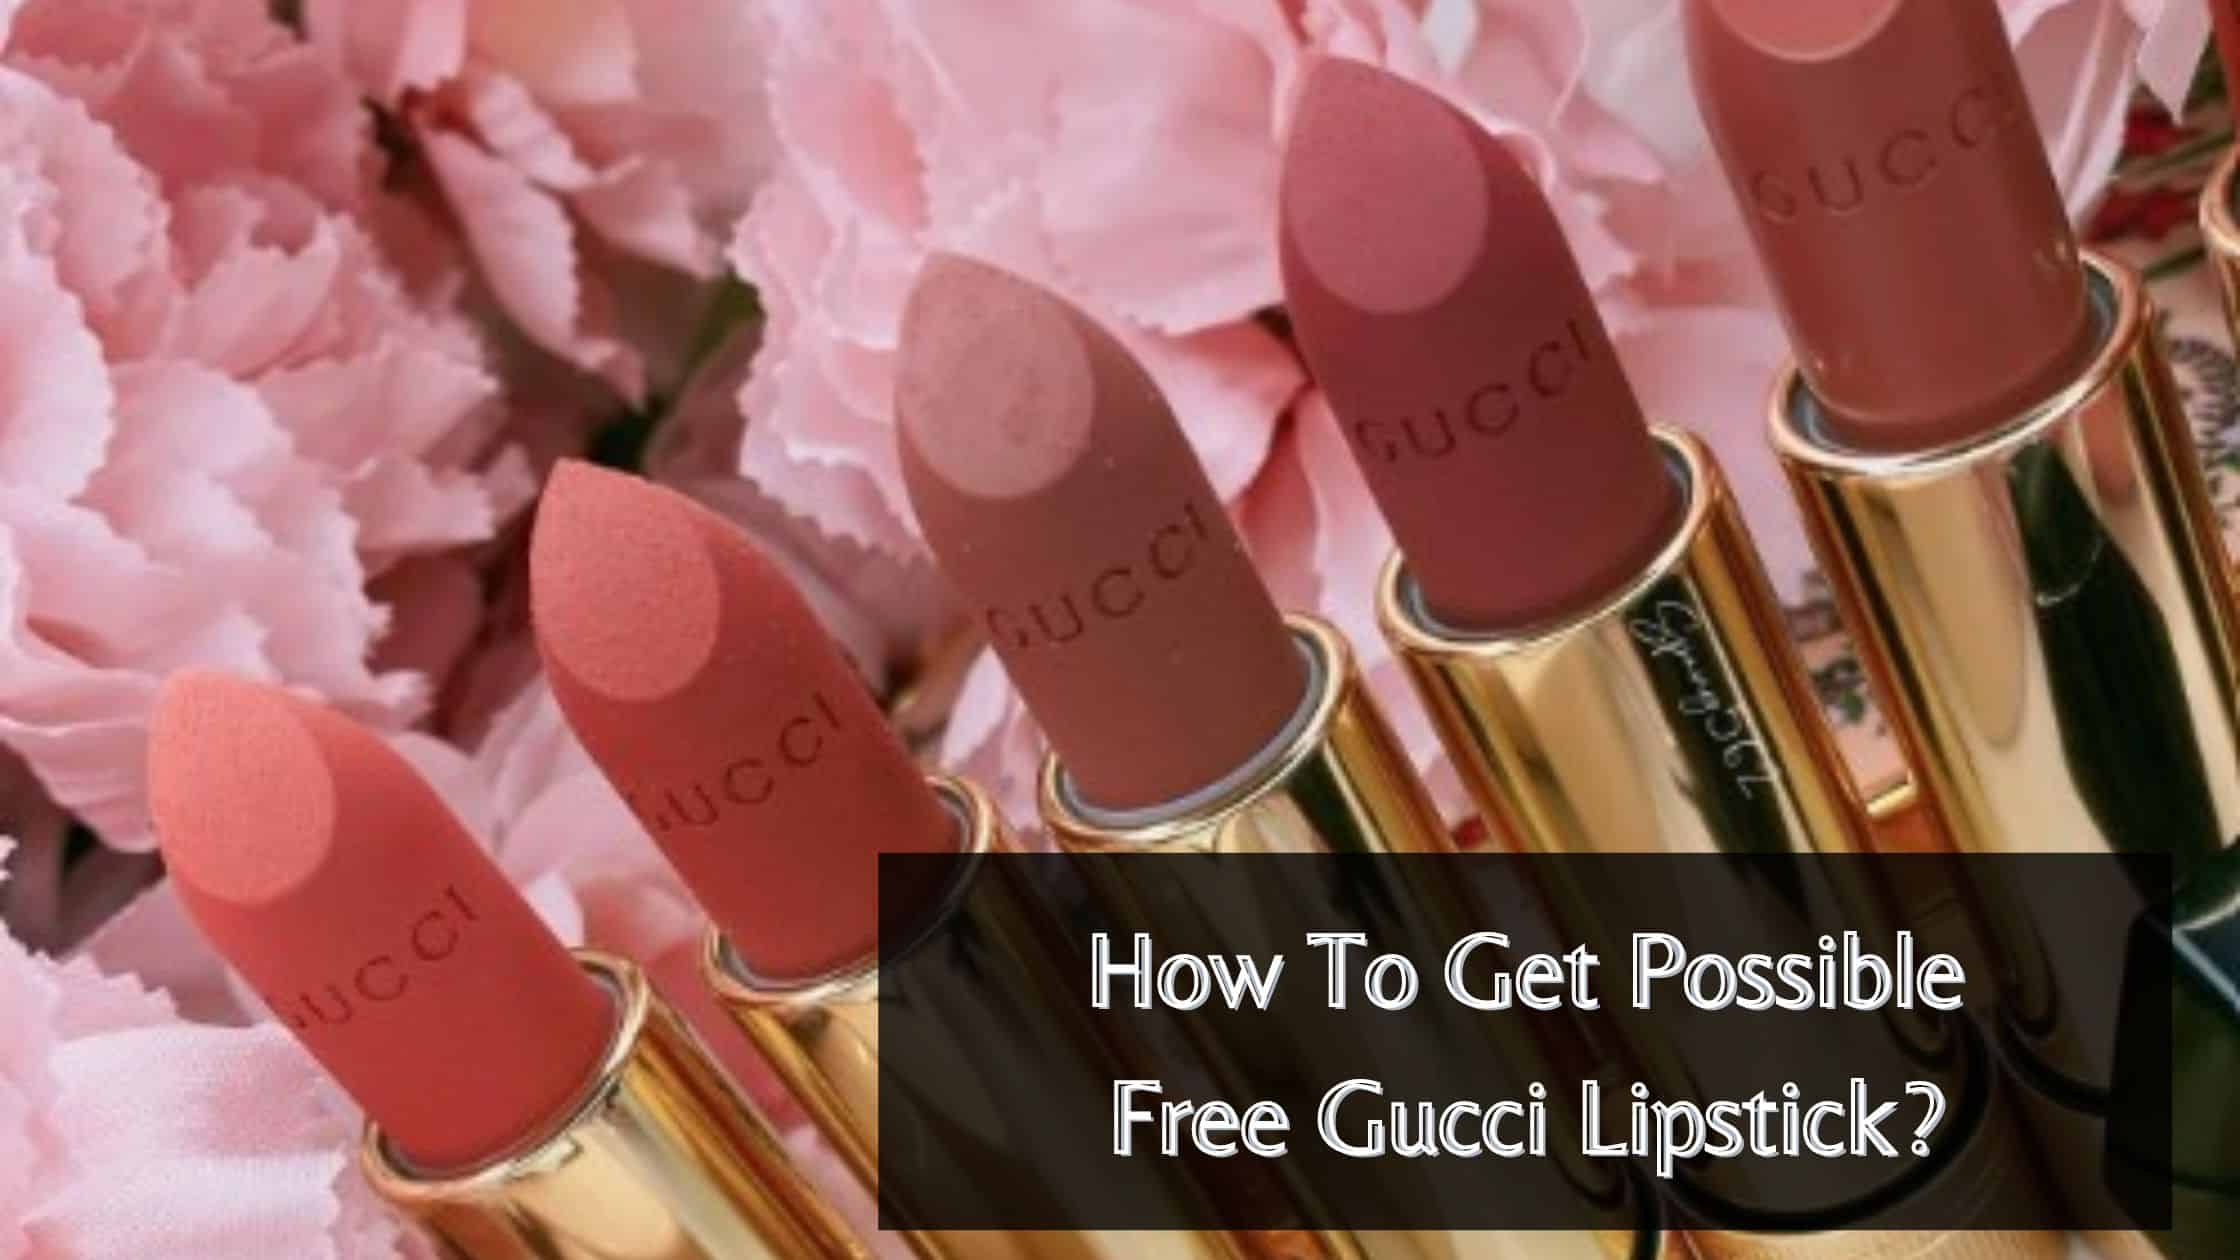 How To Get Possible Free Gucci Lipstick